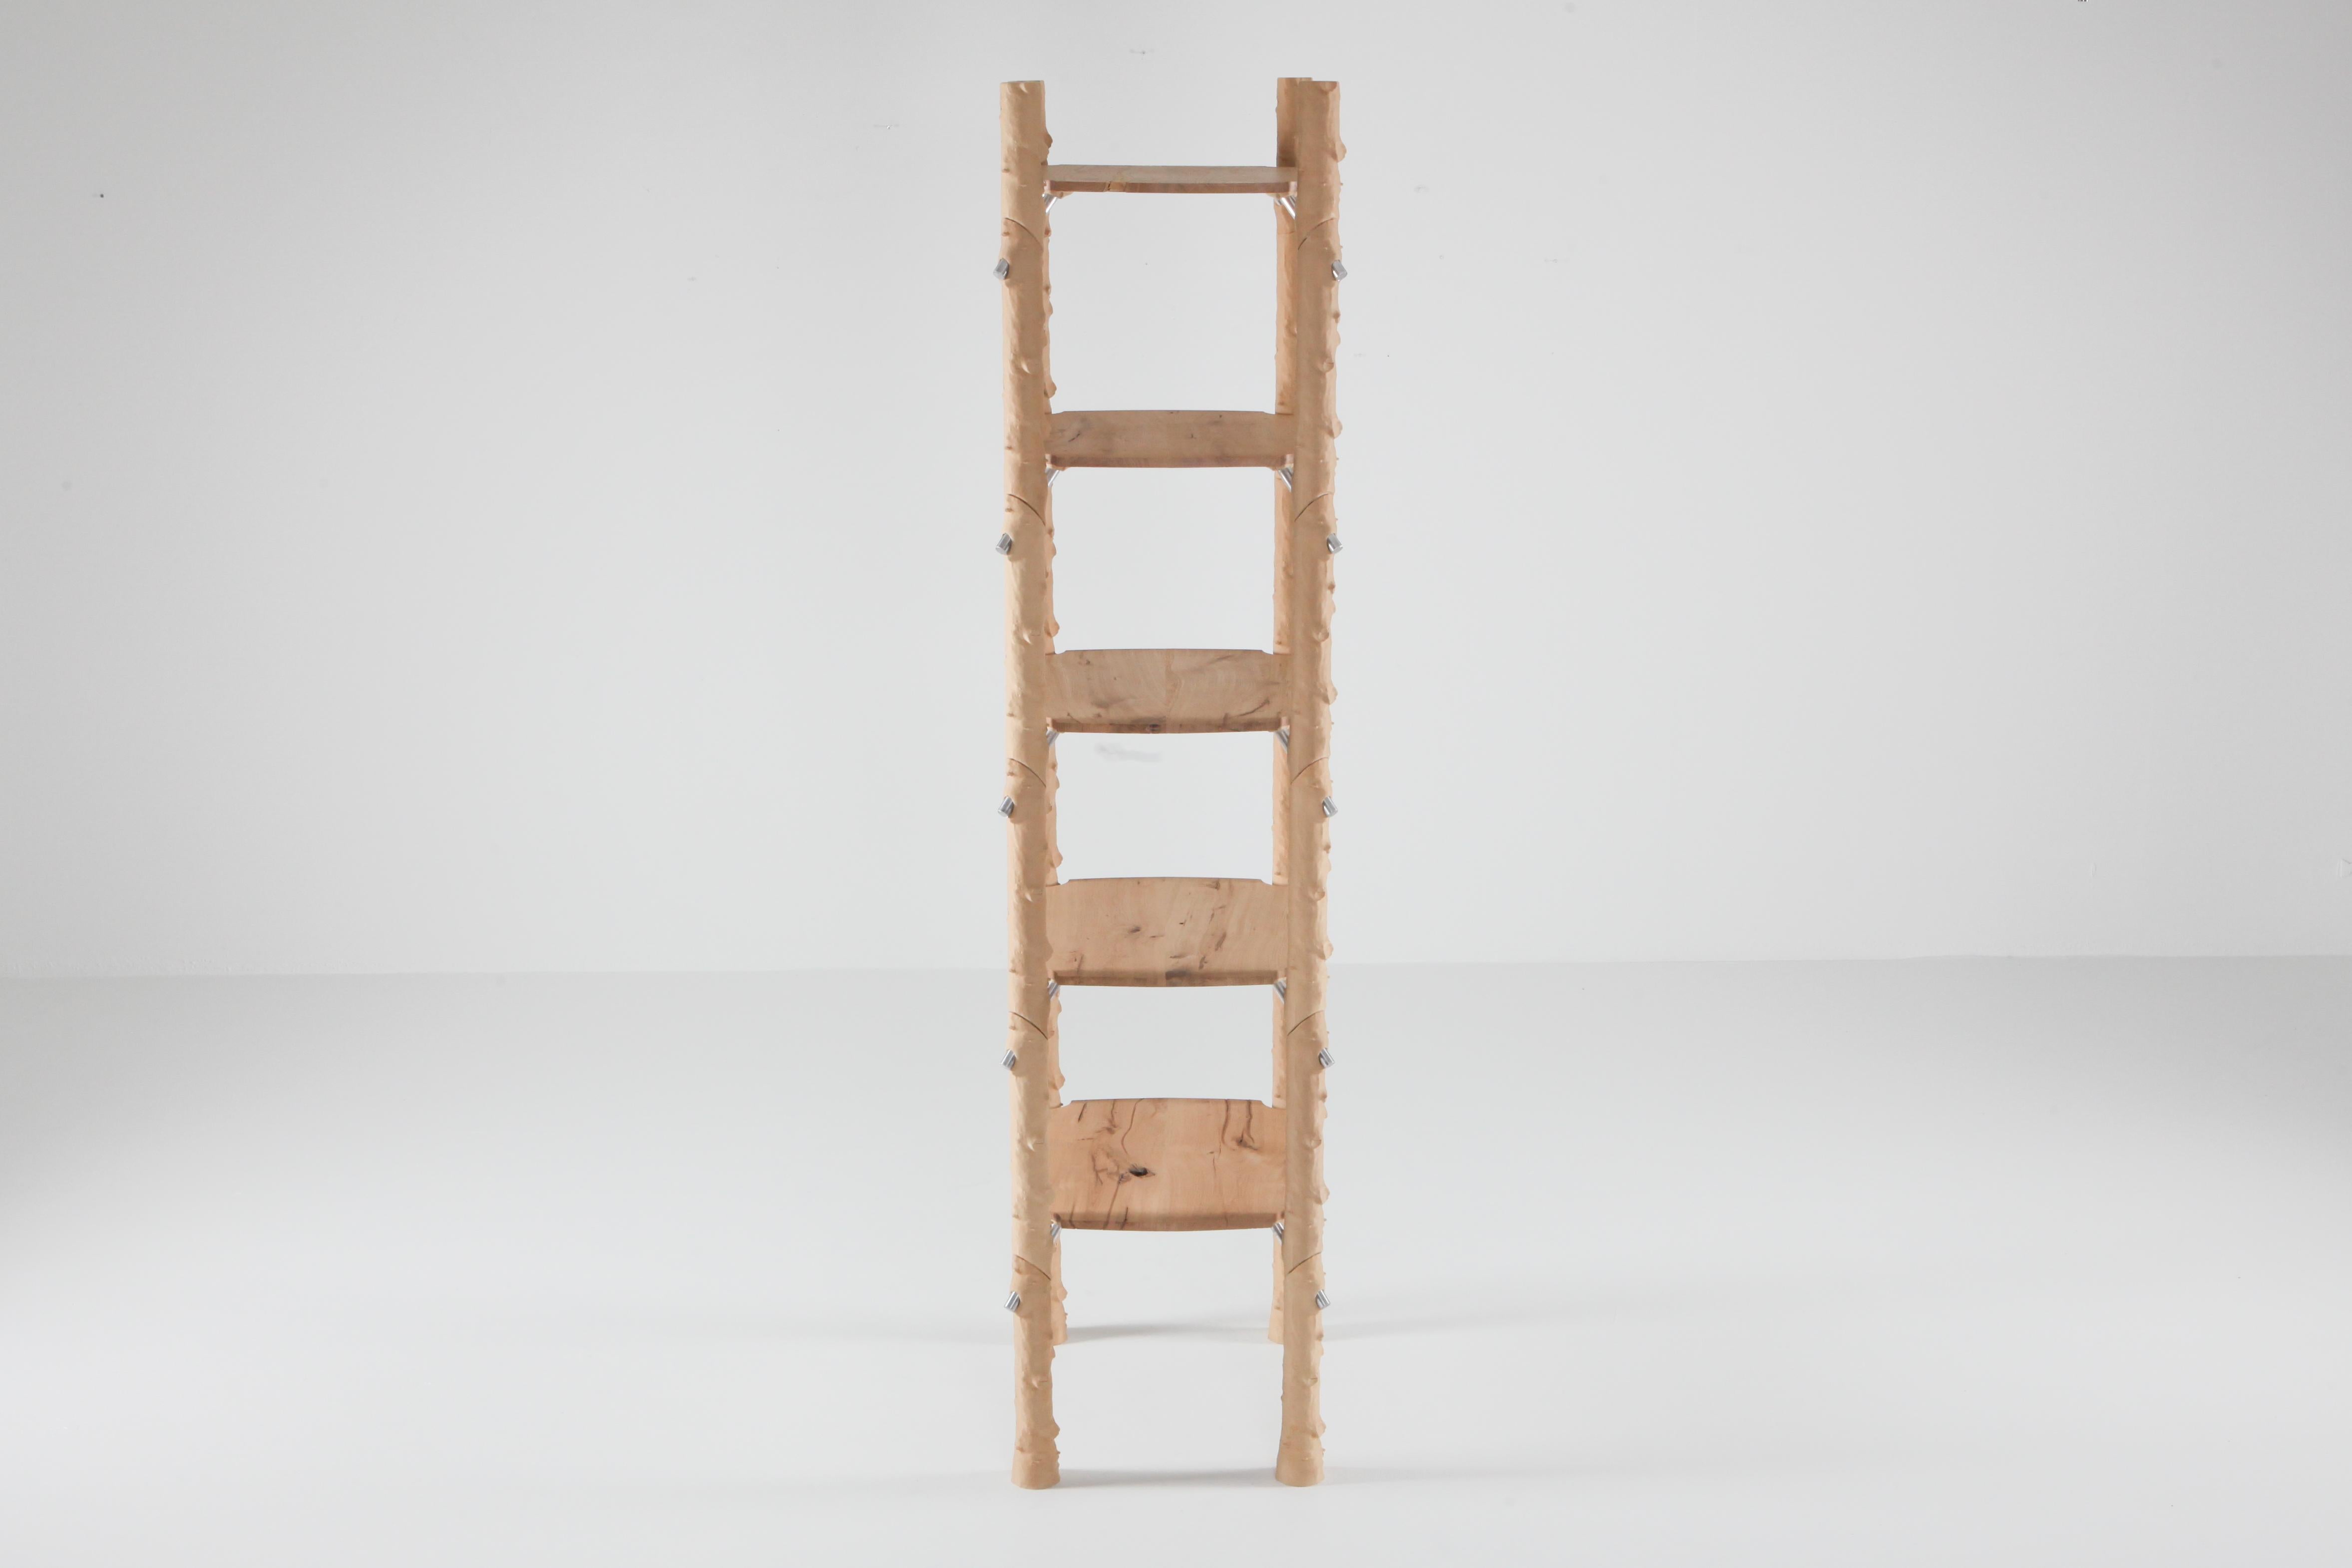 'Branch-Ish Shelf' Contemporary Free Standing Shelves, Schimmel & Schweikle 2020 In New Condition For Sale In Antwerp, BE